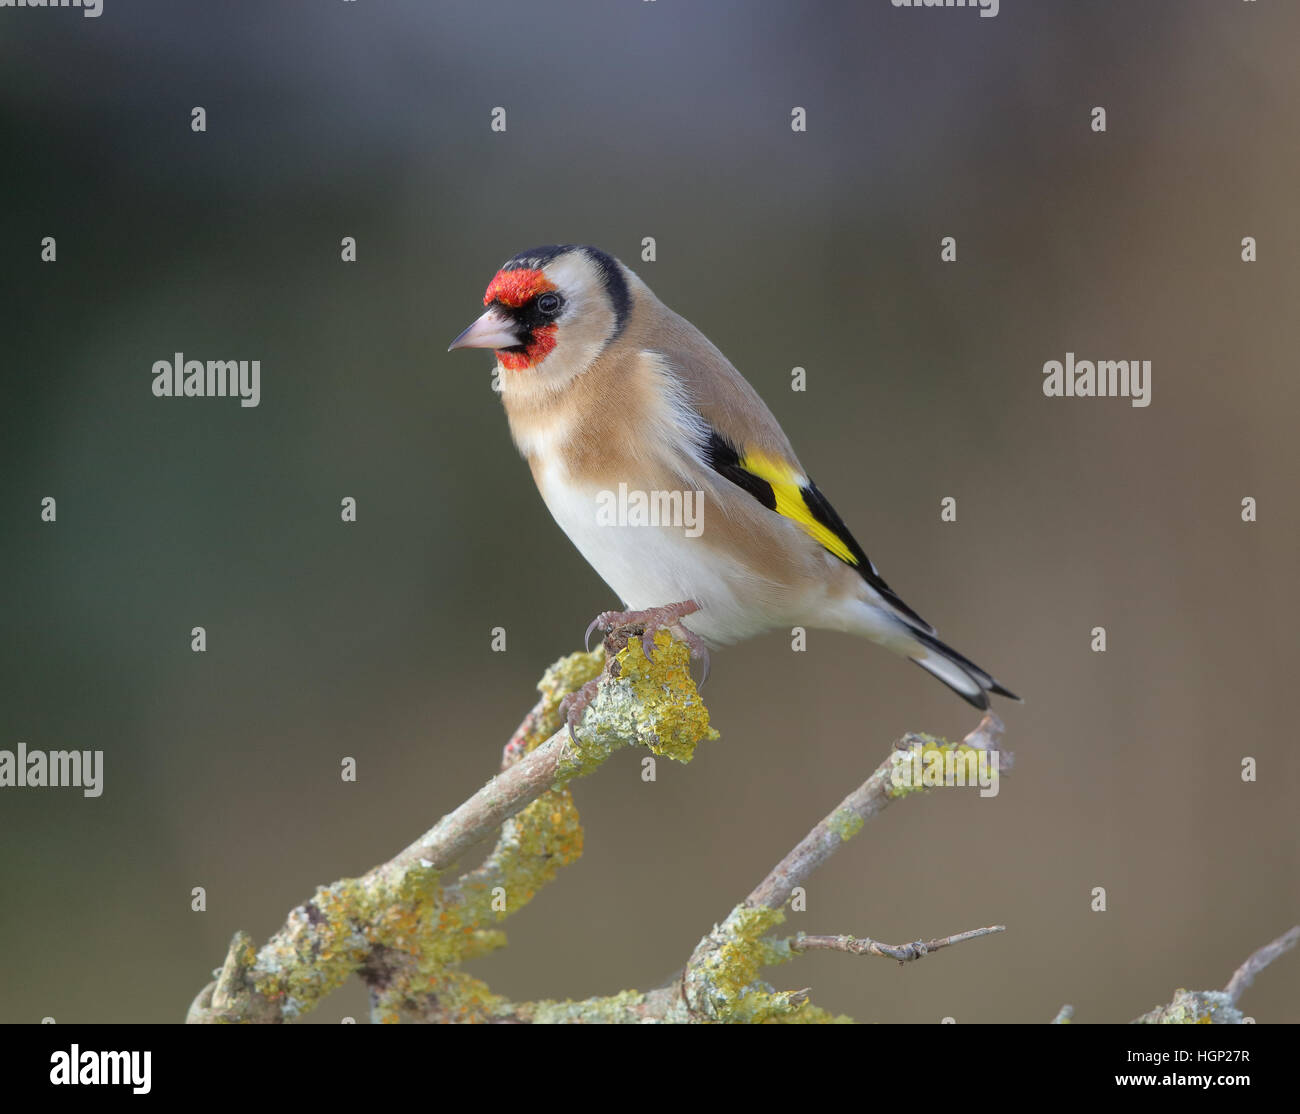 Goldfinch, Carduelis carduelis, in a garden in winter Stock Photo